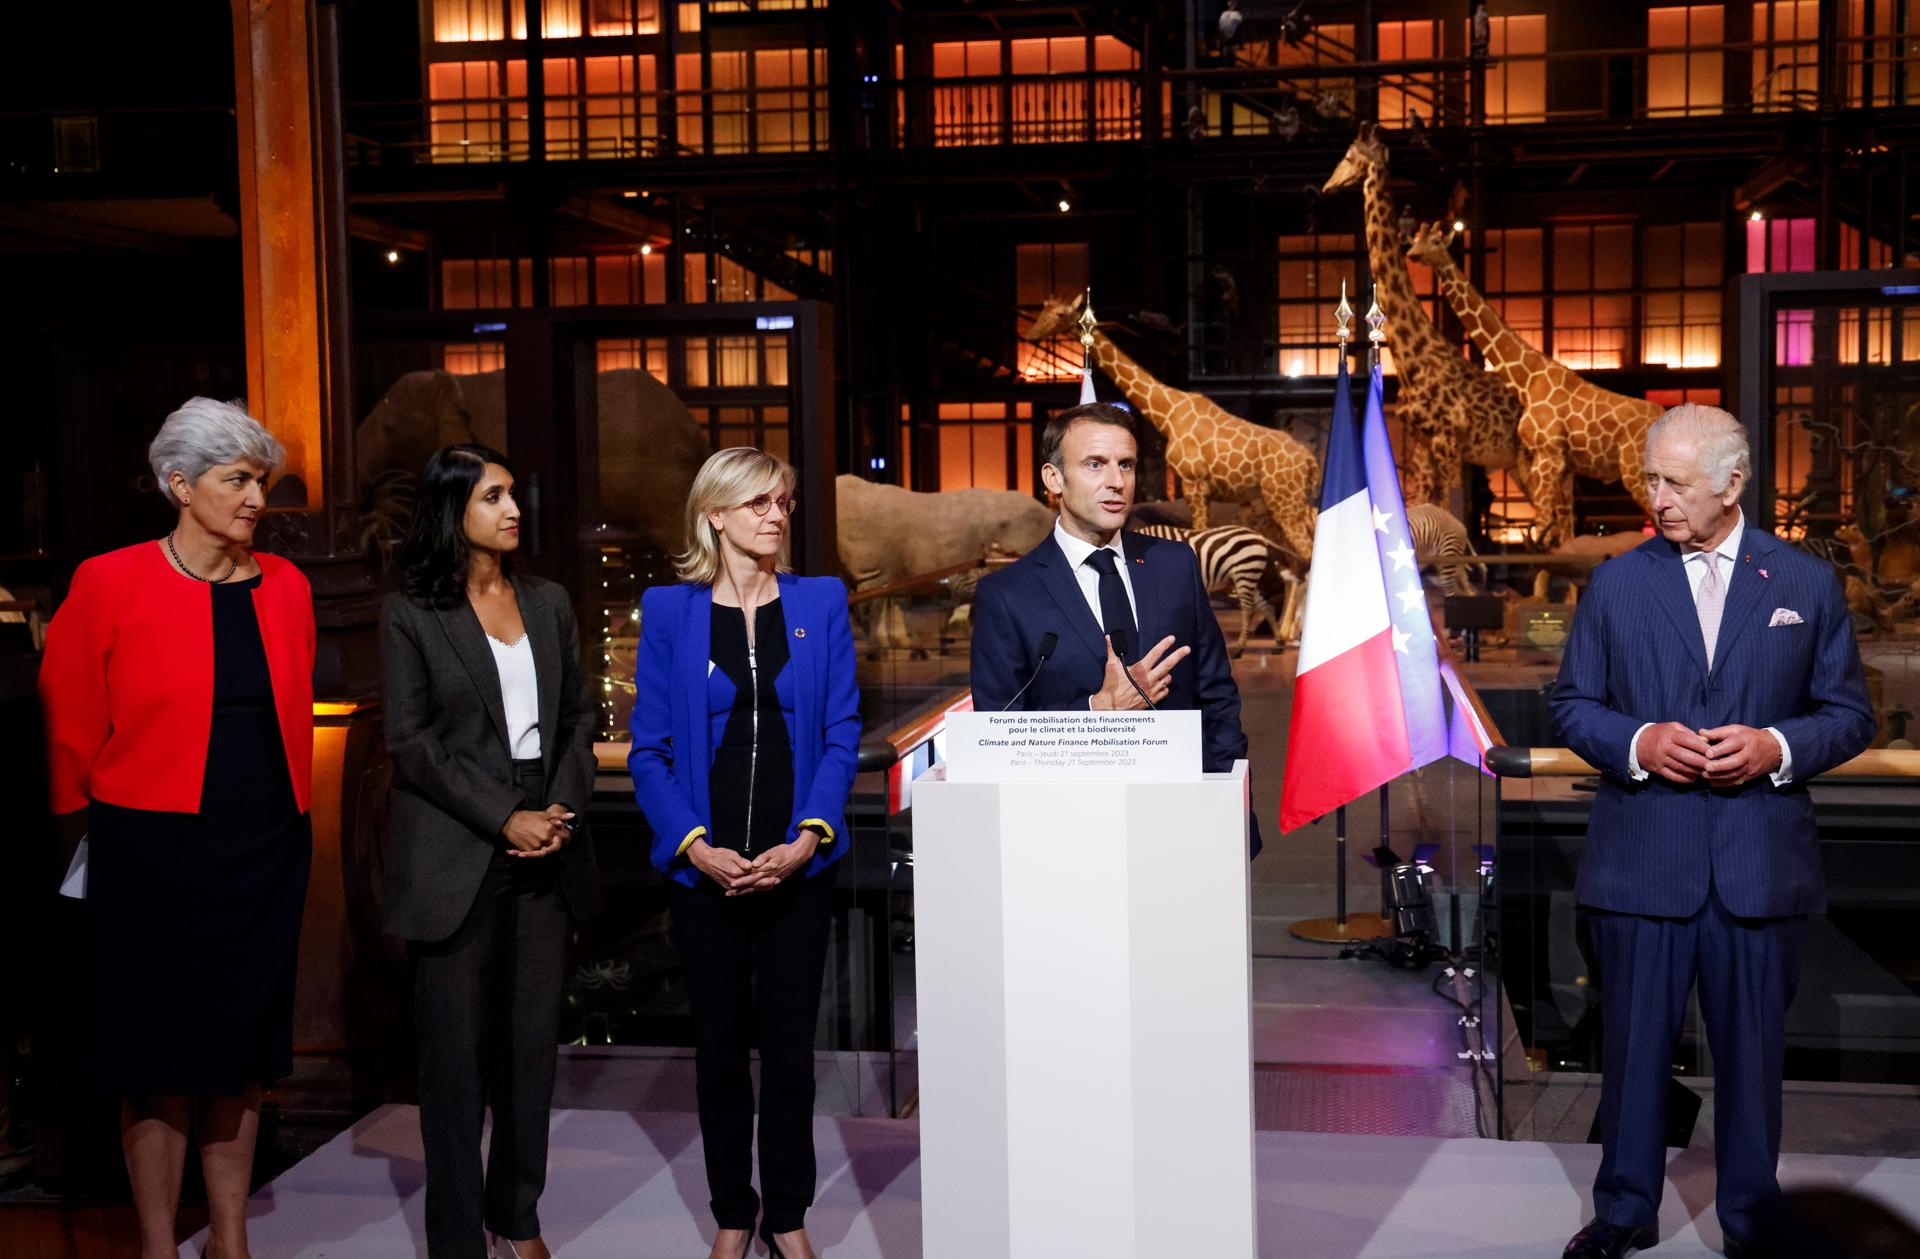 Paris (France), 21/09/2023.- French President Emmanuel Macron delivers a speech next to Britain's King Charles III (R), UK Secretary of State for Energy Security and Net Zero Claire Coutinho (2-L), French Minister for Energy Transition Agnes Pannier-Runacher (3-L) during their visit to the Museum of Natural History to meet business leaders and talk about biodiversity, in Paris, France, 21 September 2023 during the king's state visit to the country. (Francia, Reino Unido) EFE/EPA/LUDOVIC MARIN / POOL MAXPPP OUT
